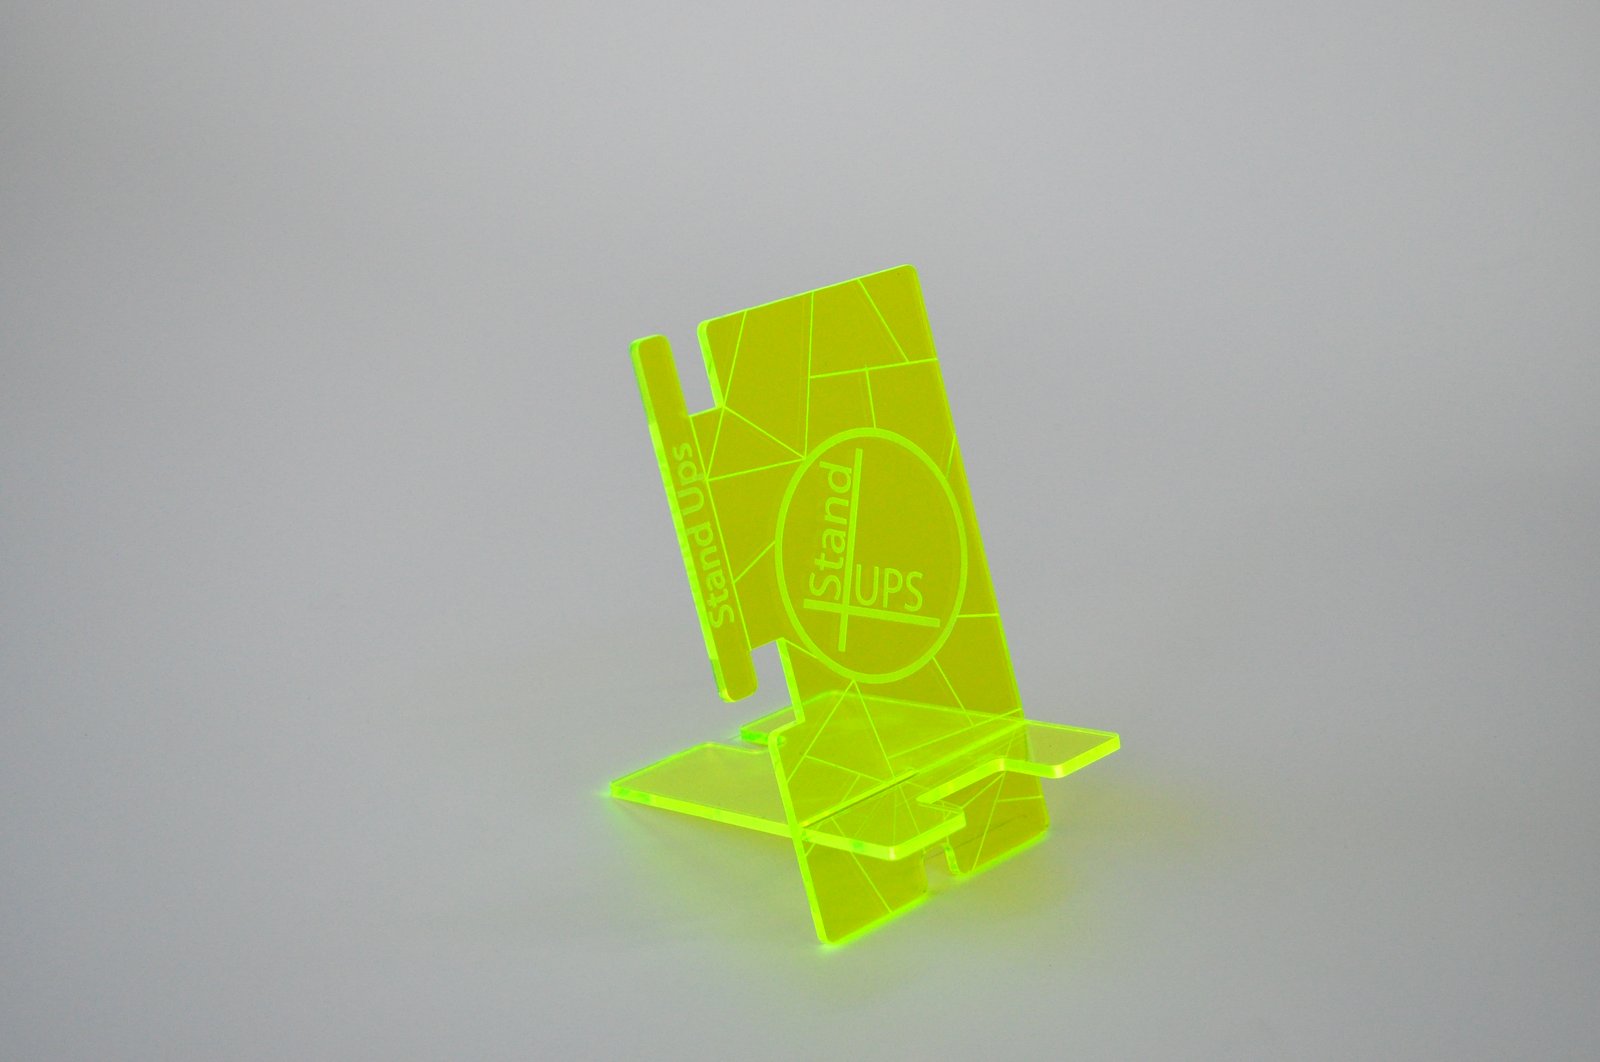 Green Acrylic Photo Stand